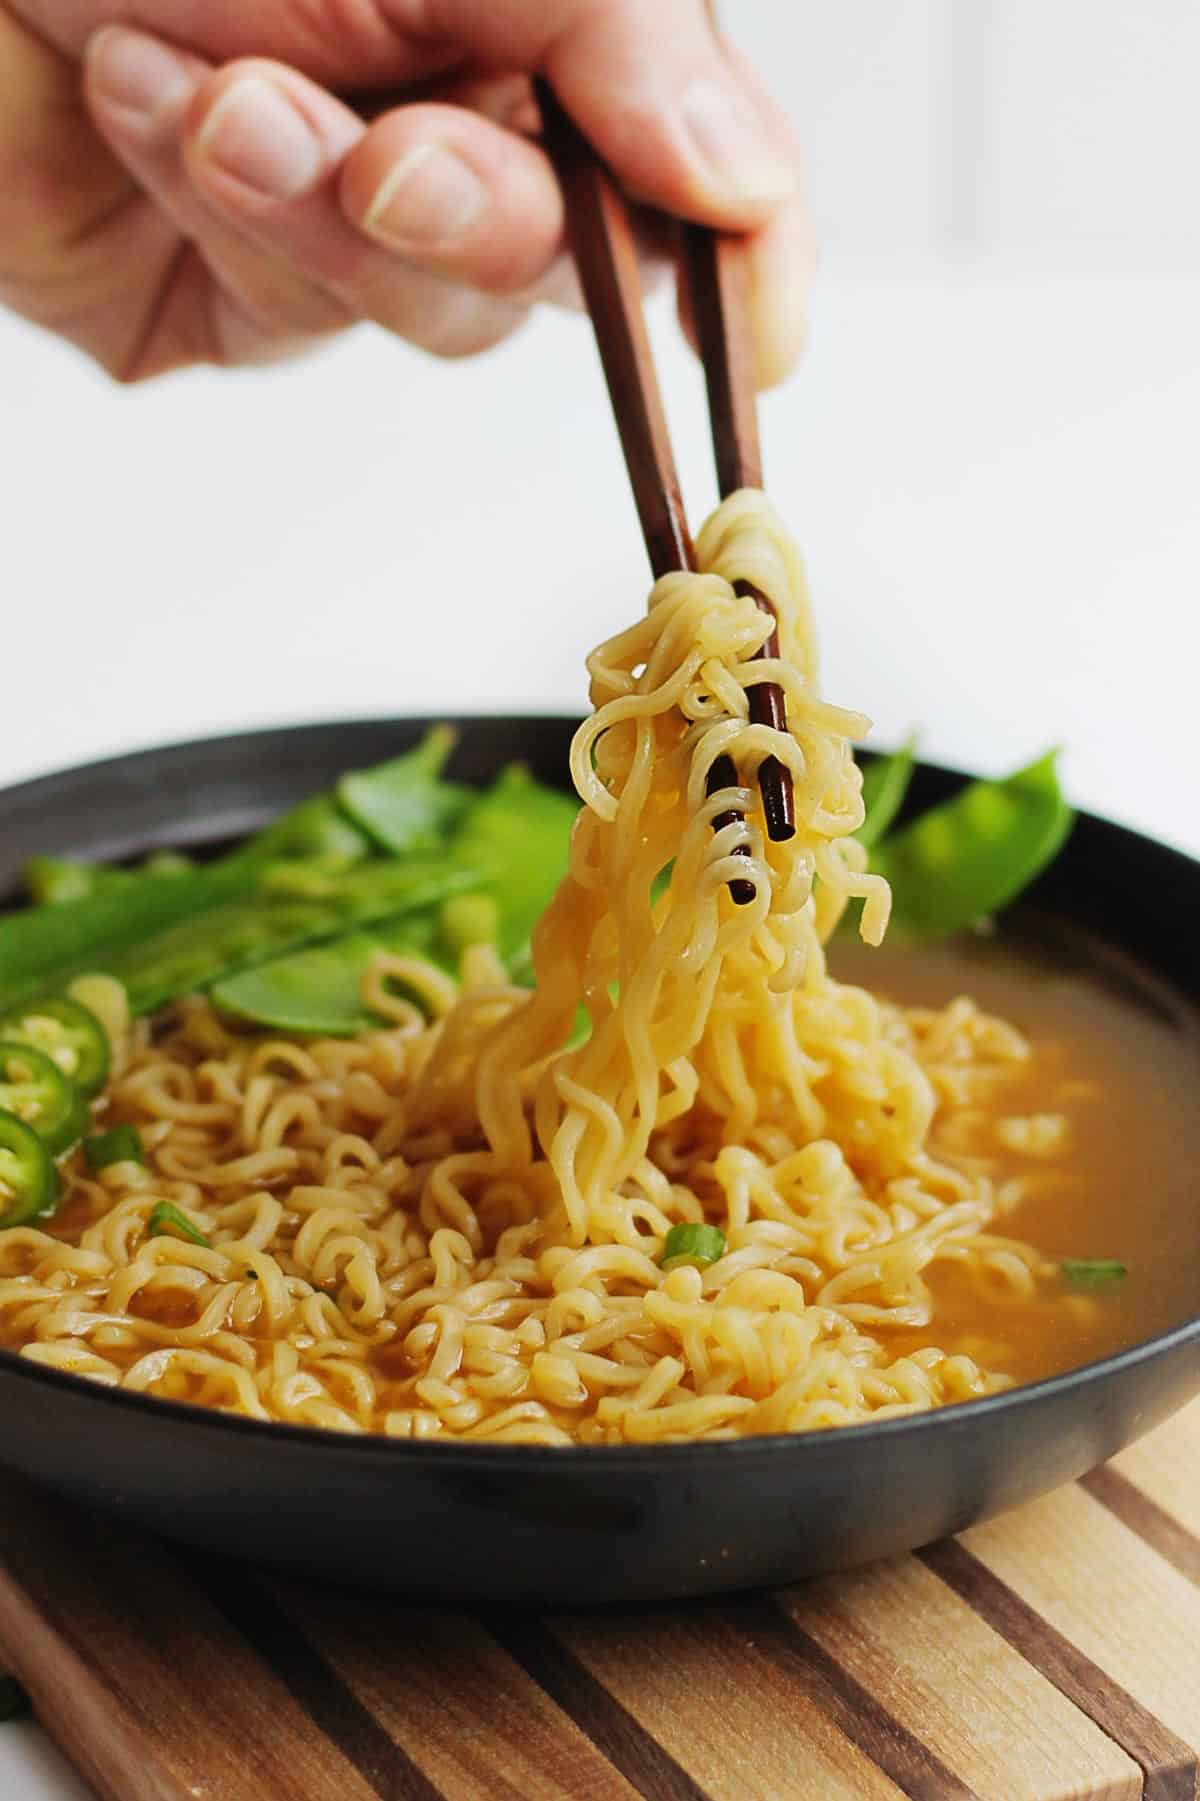 A picture of scooping up ramen noodles with chopsticks in a black bowl.